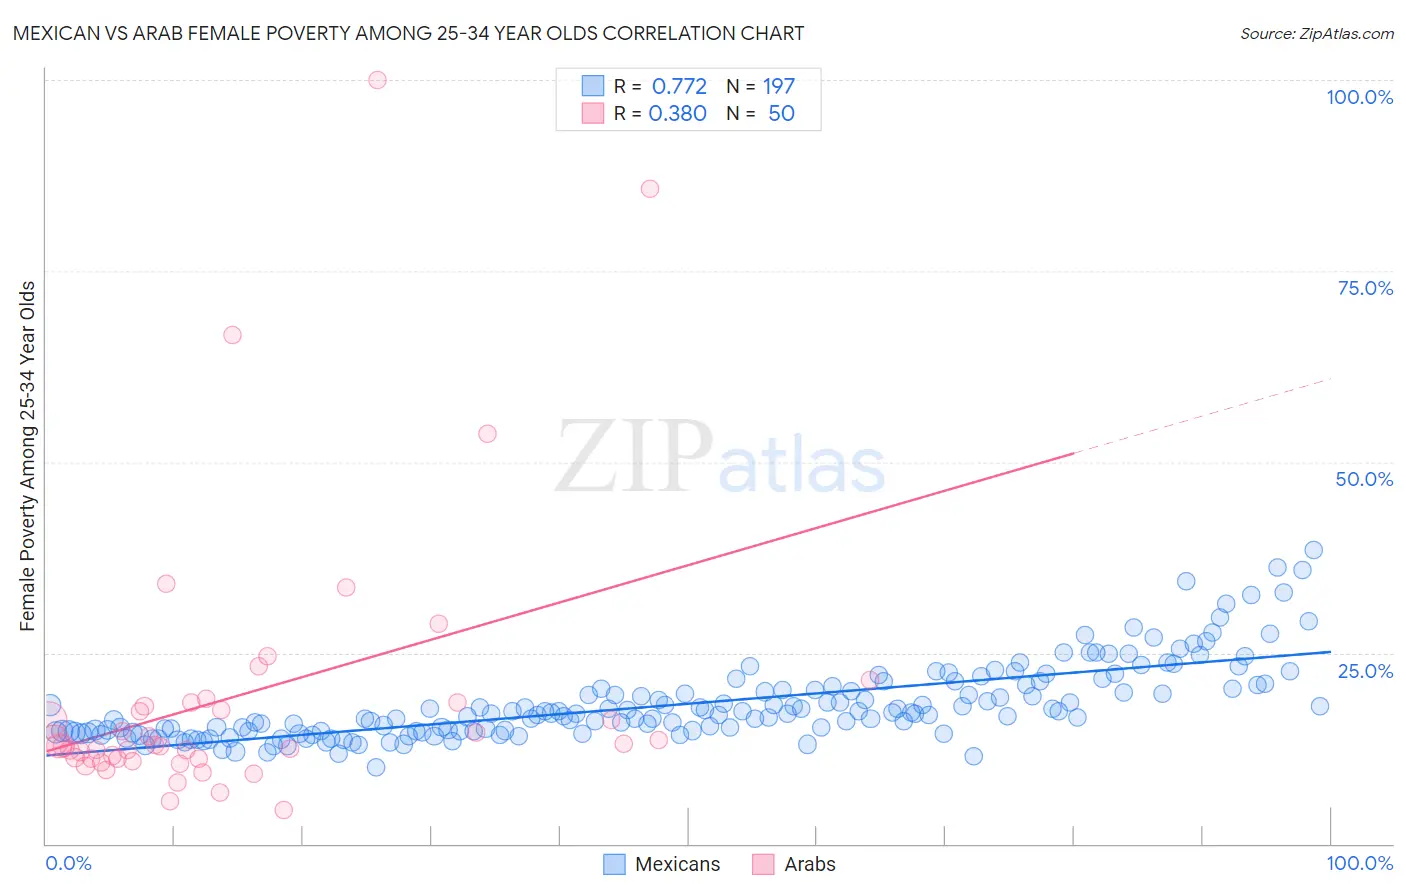 Mexican vs Arab Female Poverty Among 25-34 Year Olds